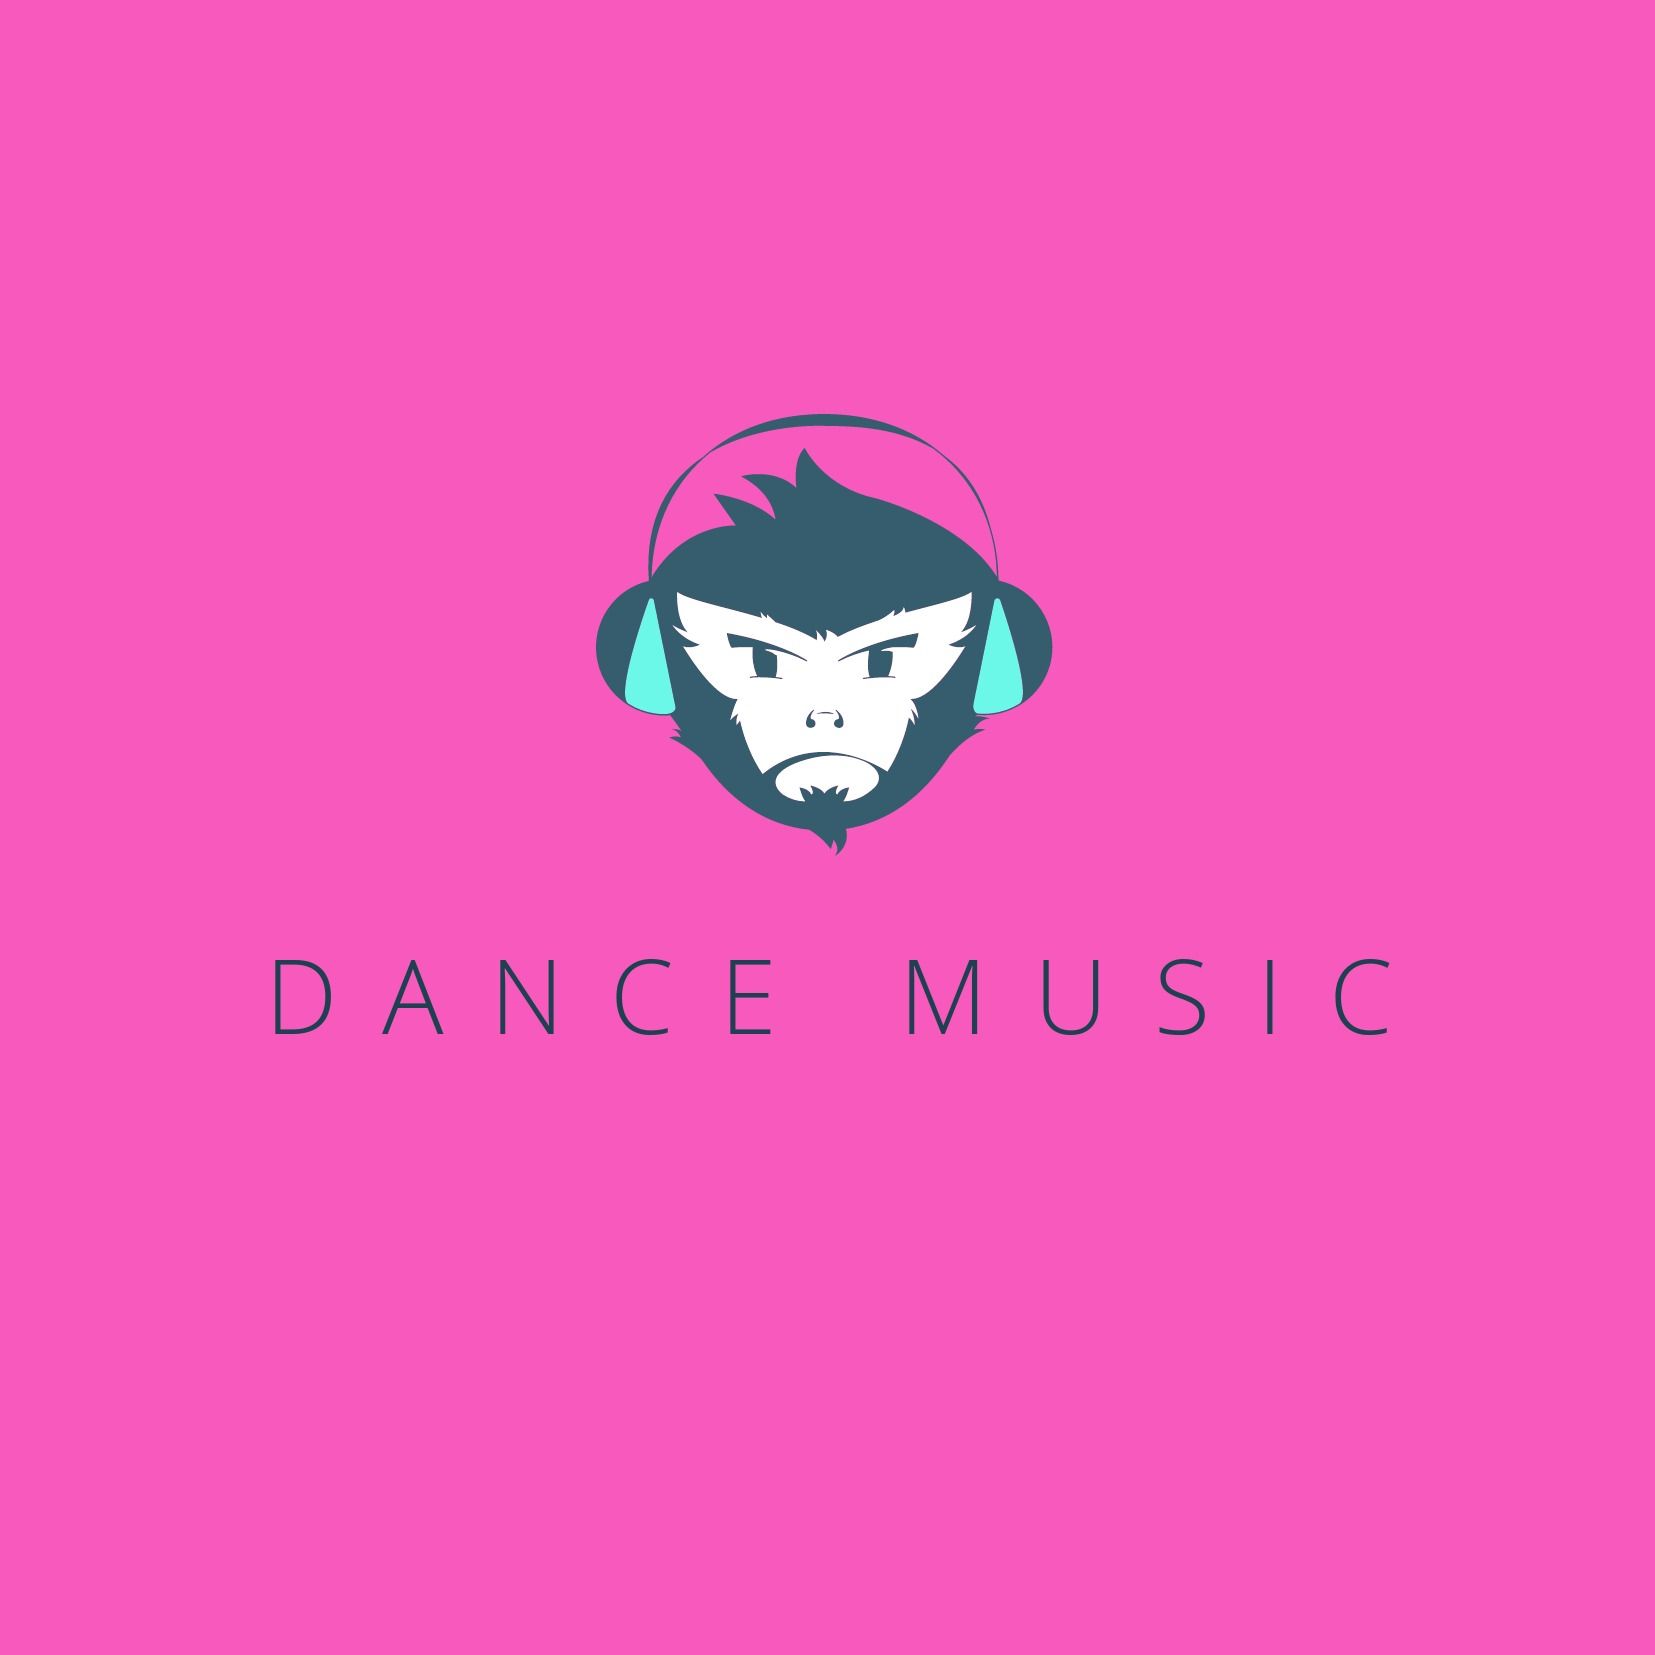 DJ logo design with monkey wearing headphones on pink background - Khula is a flexibly spaced font with a Hindi support - Image